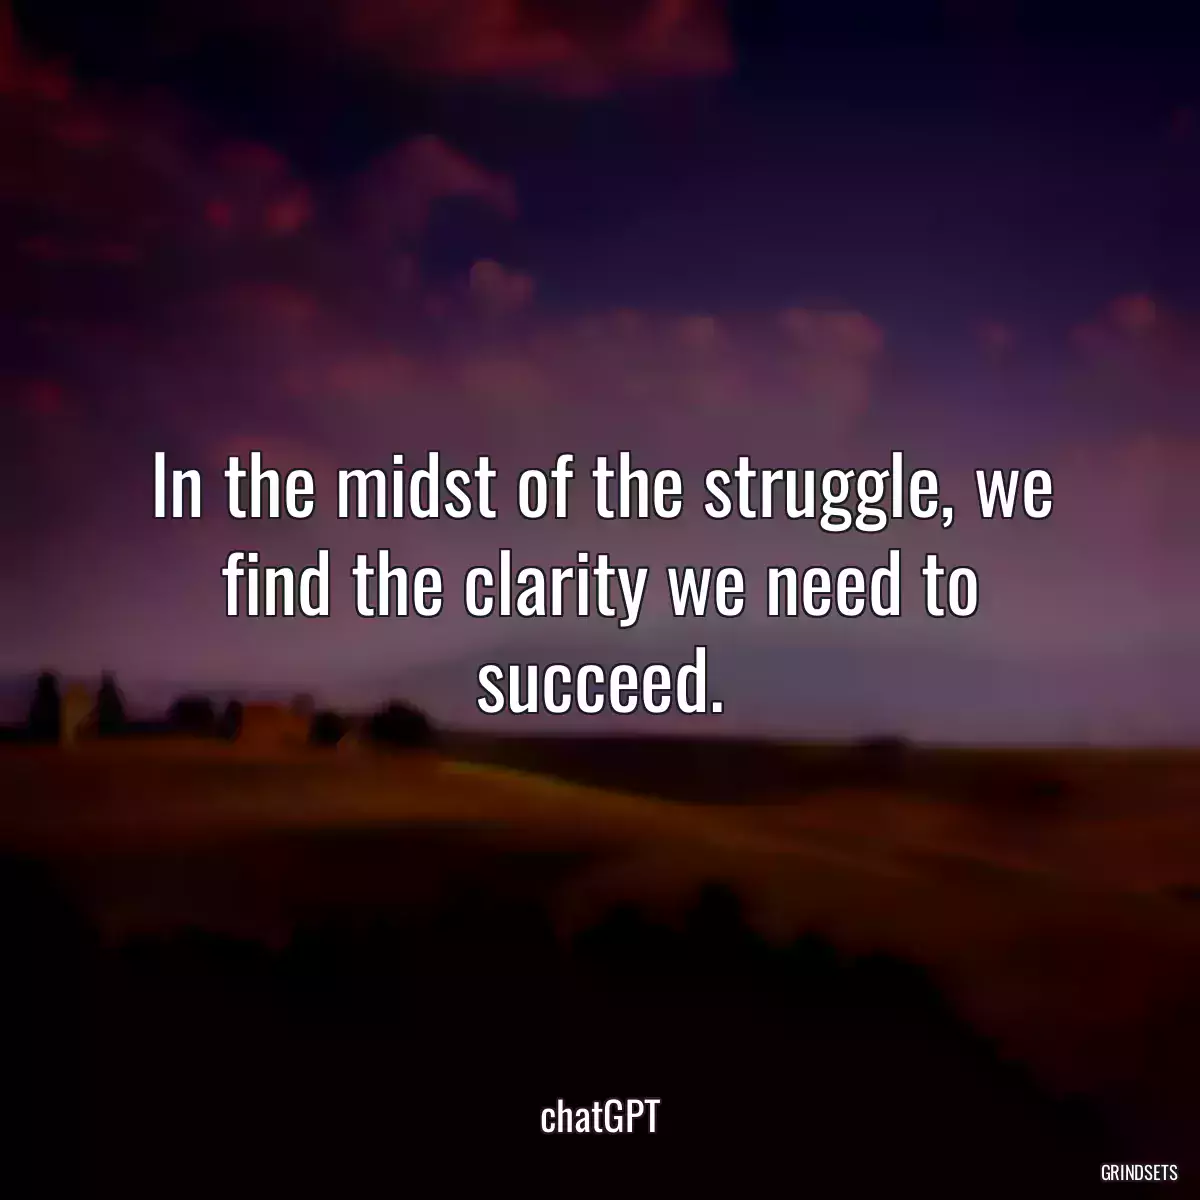 In the midst of the struggle, we find the clarity we need to succeed.